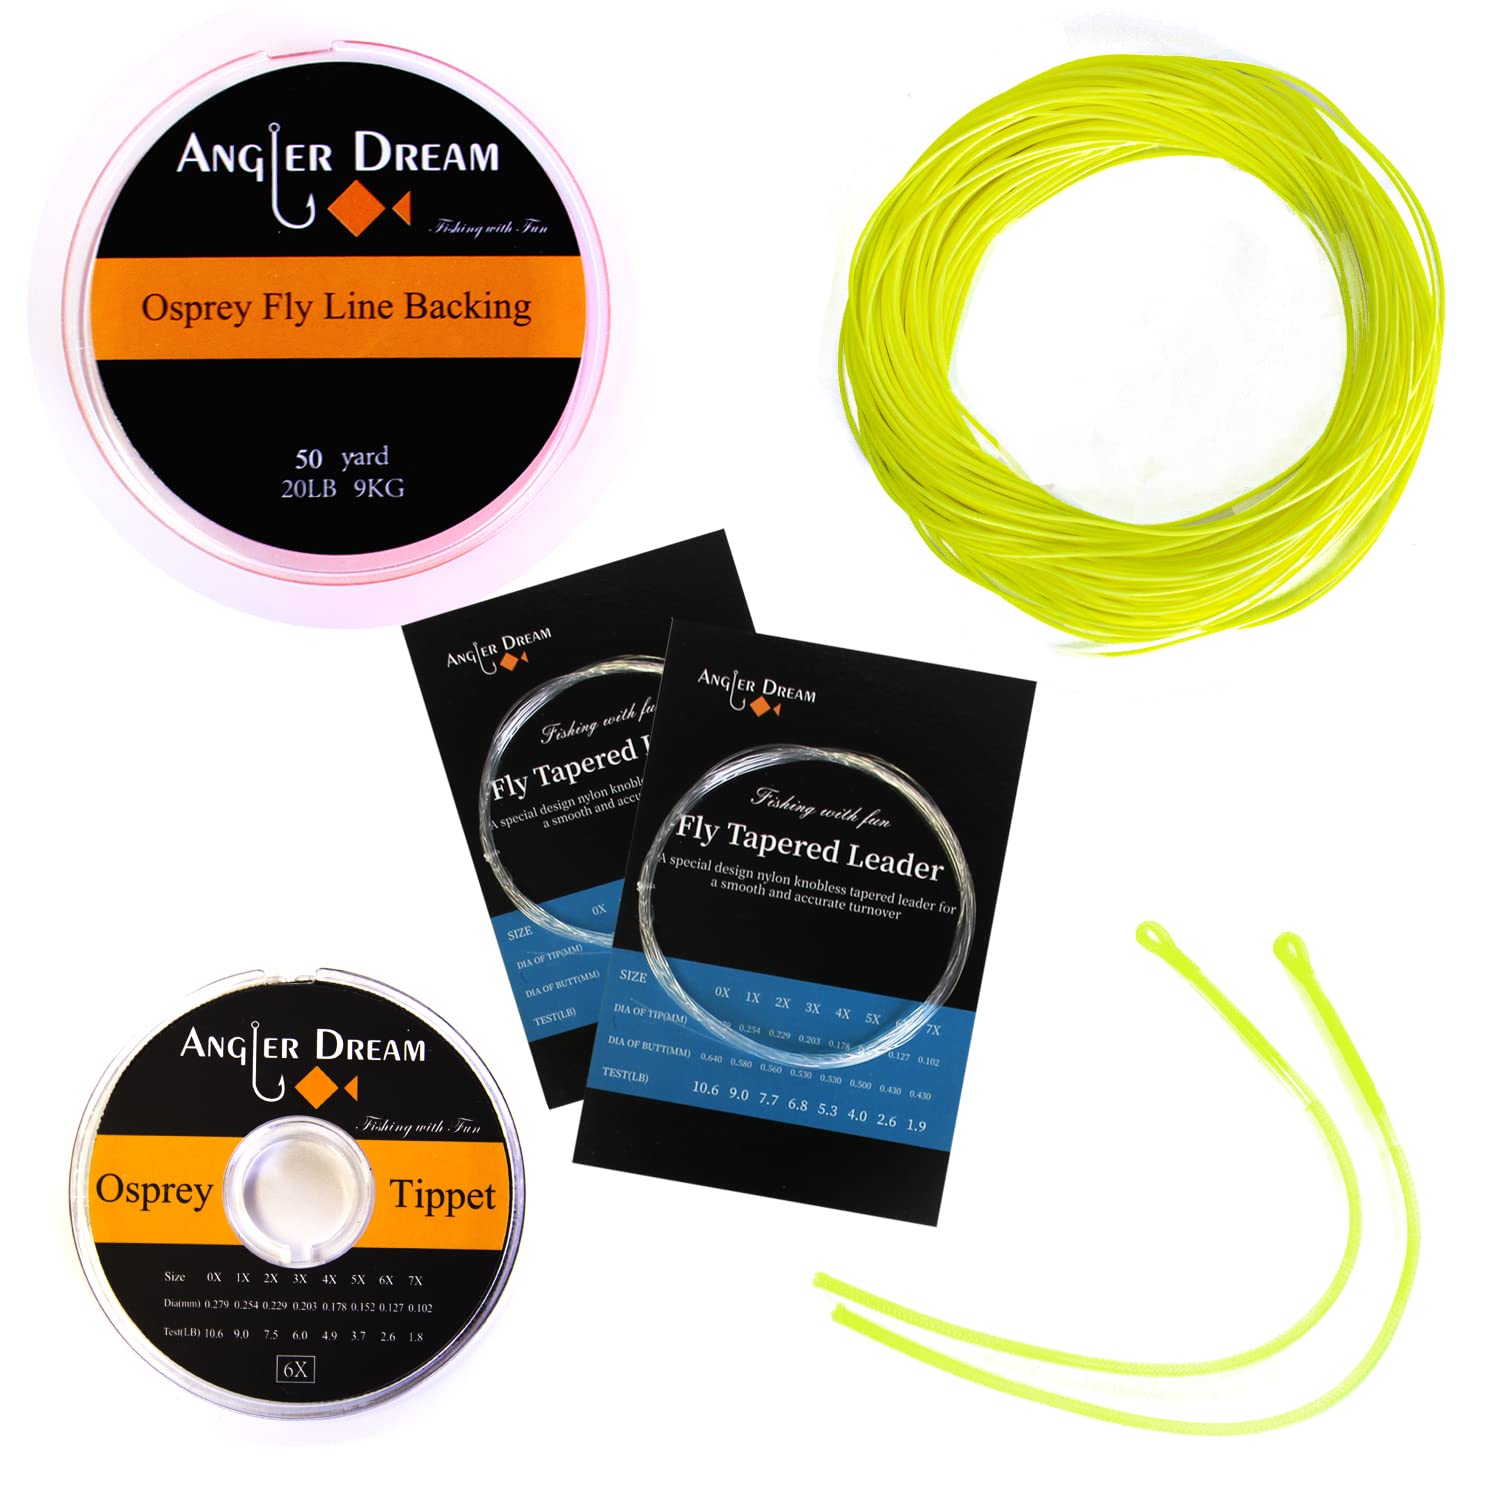 AnglerDream WF Fly Fishing Line Kit 1 2 3 4 5 6 7 8 9WT Fly